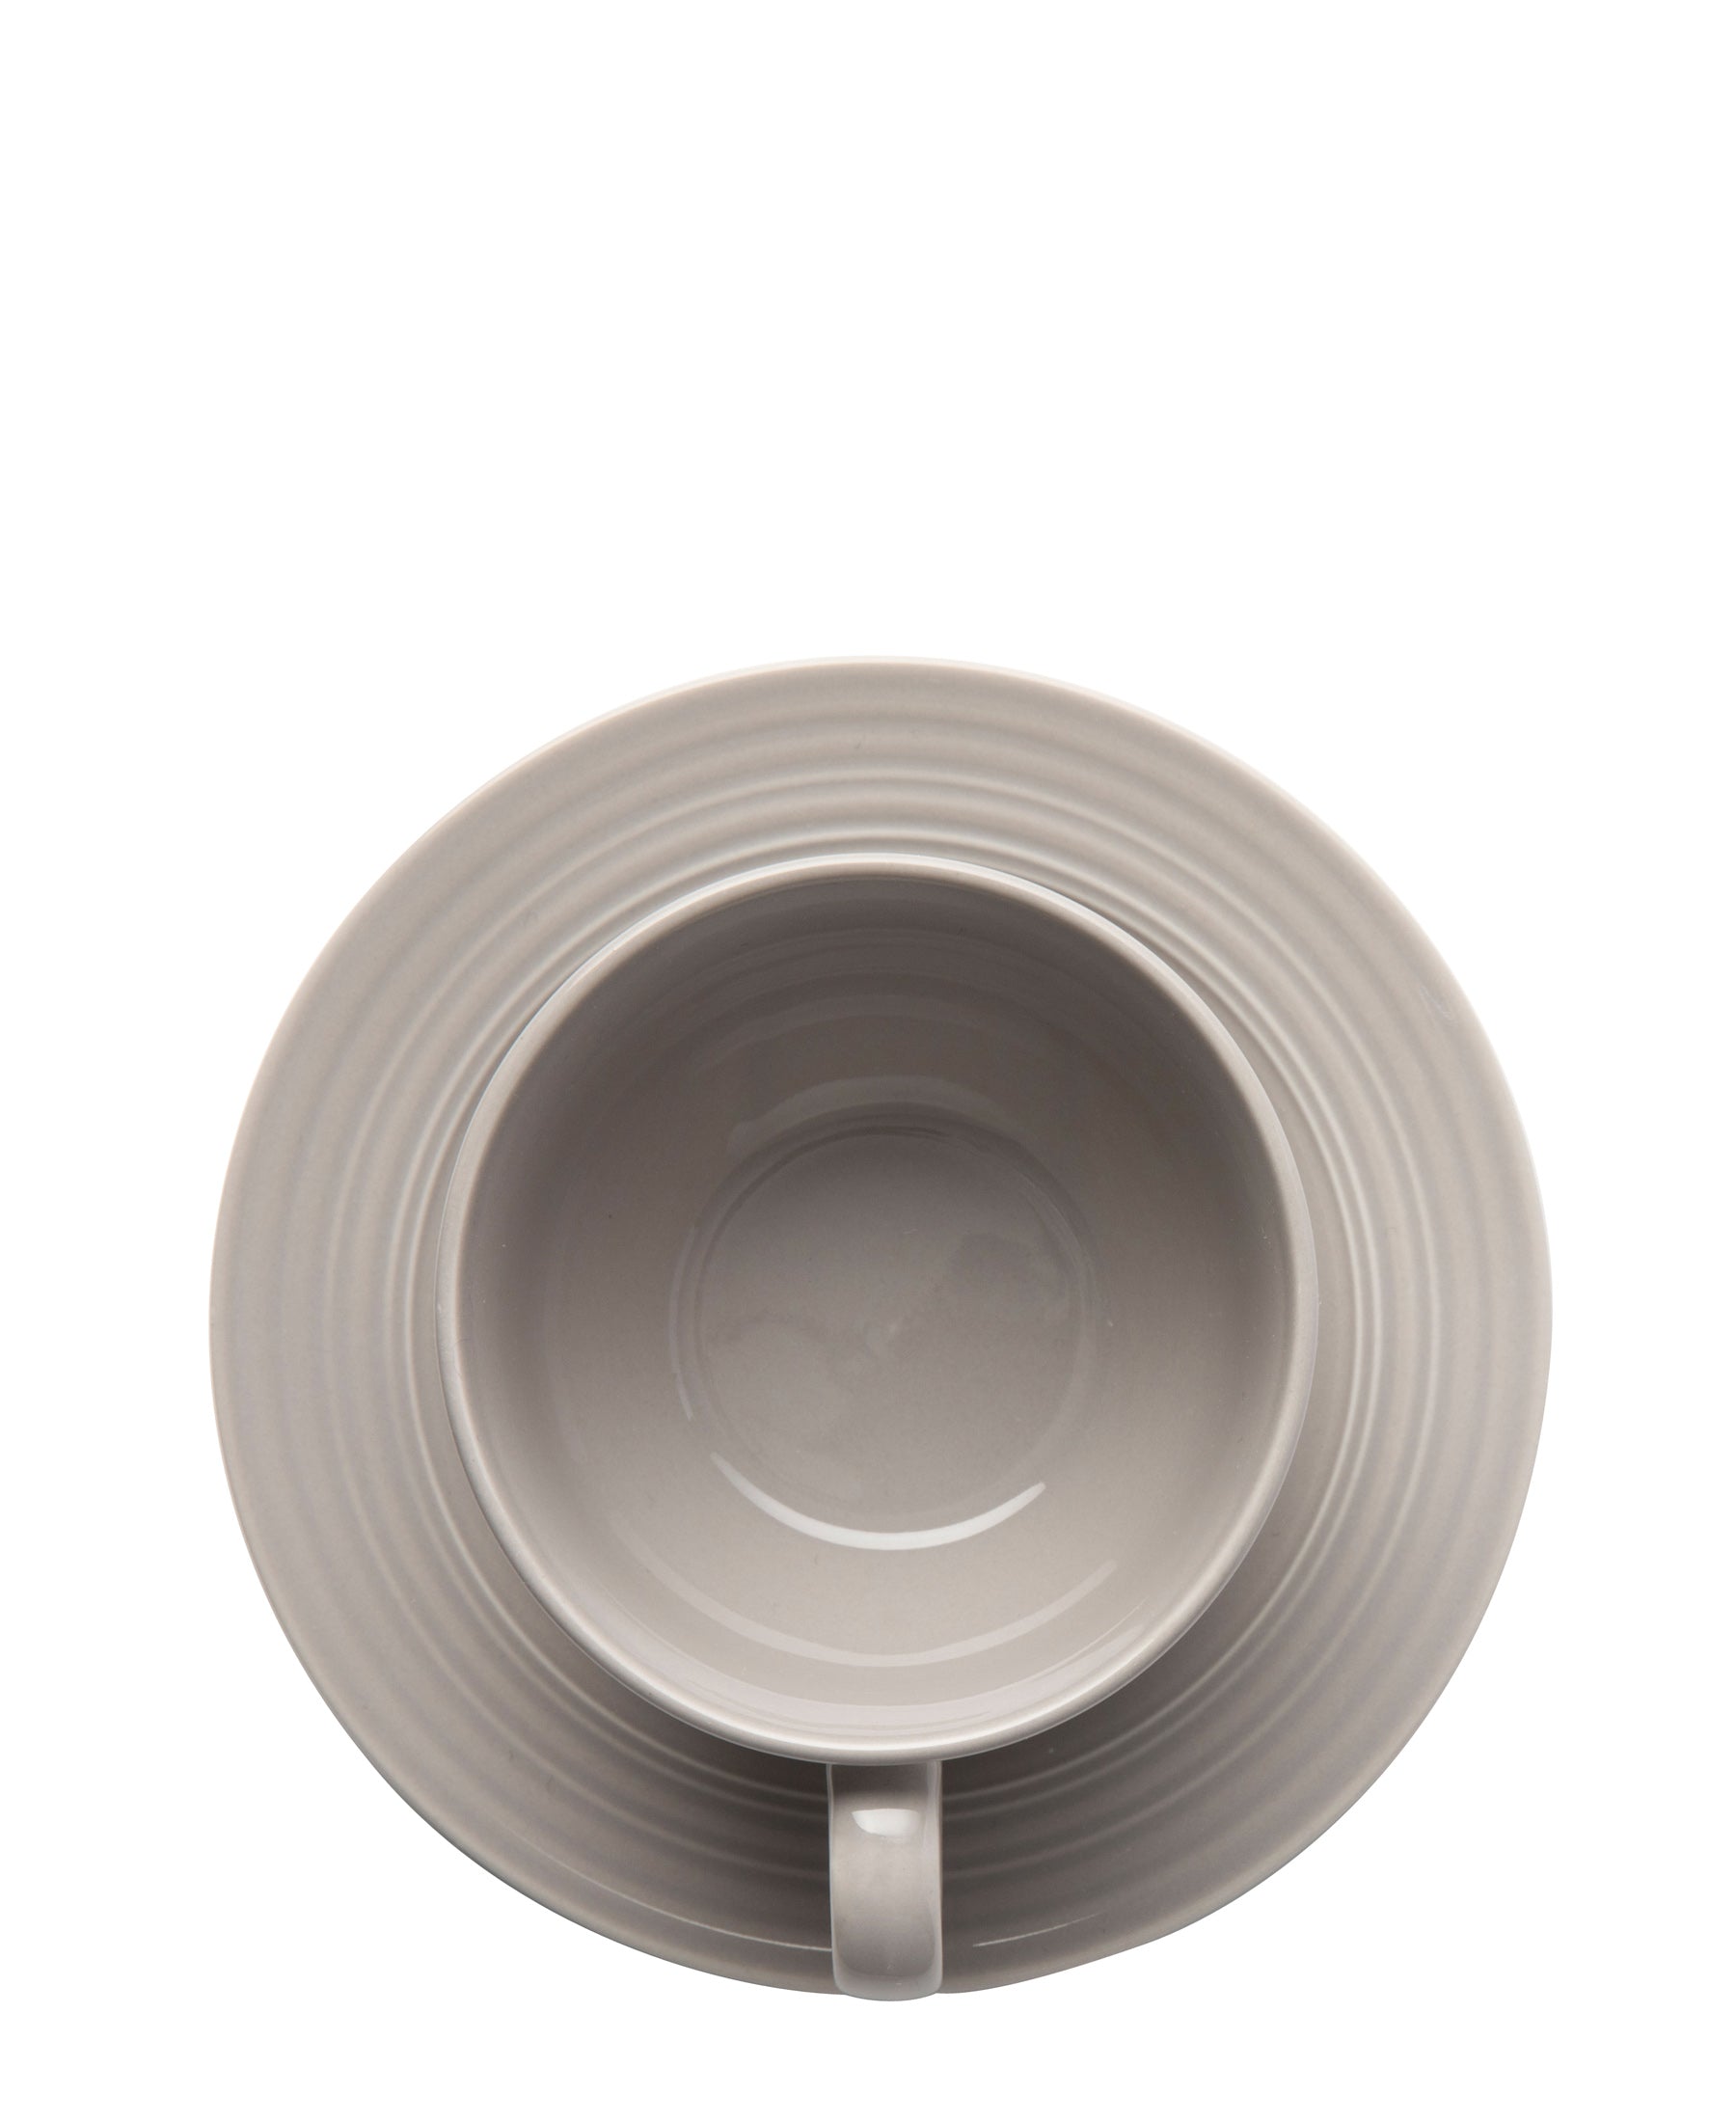 Jenna Clifford Embossed Lines 200ml Cup & Saucer - Light Grey